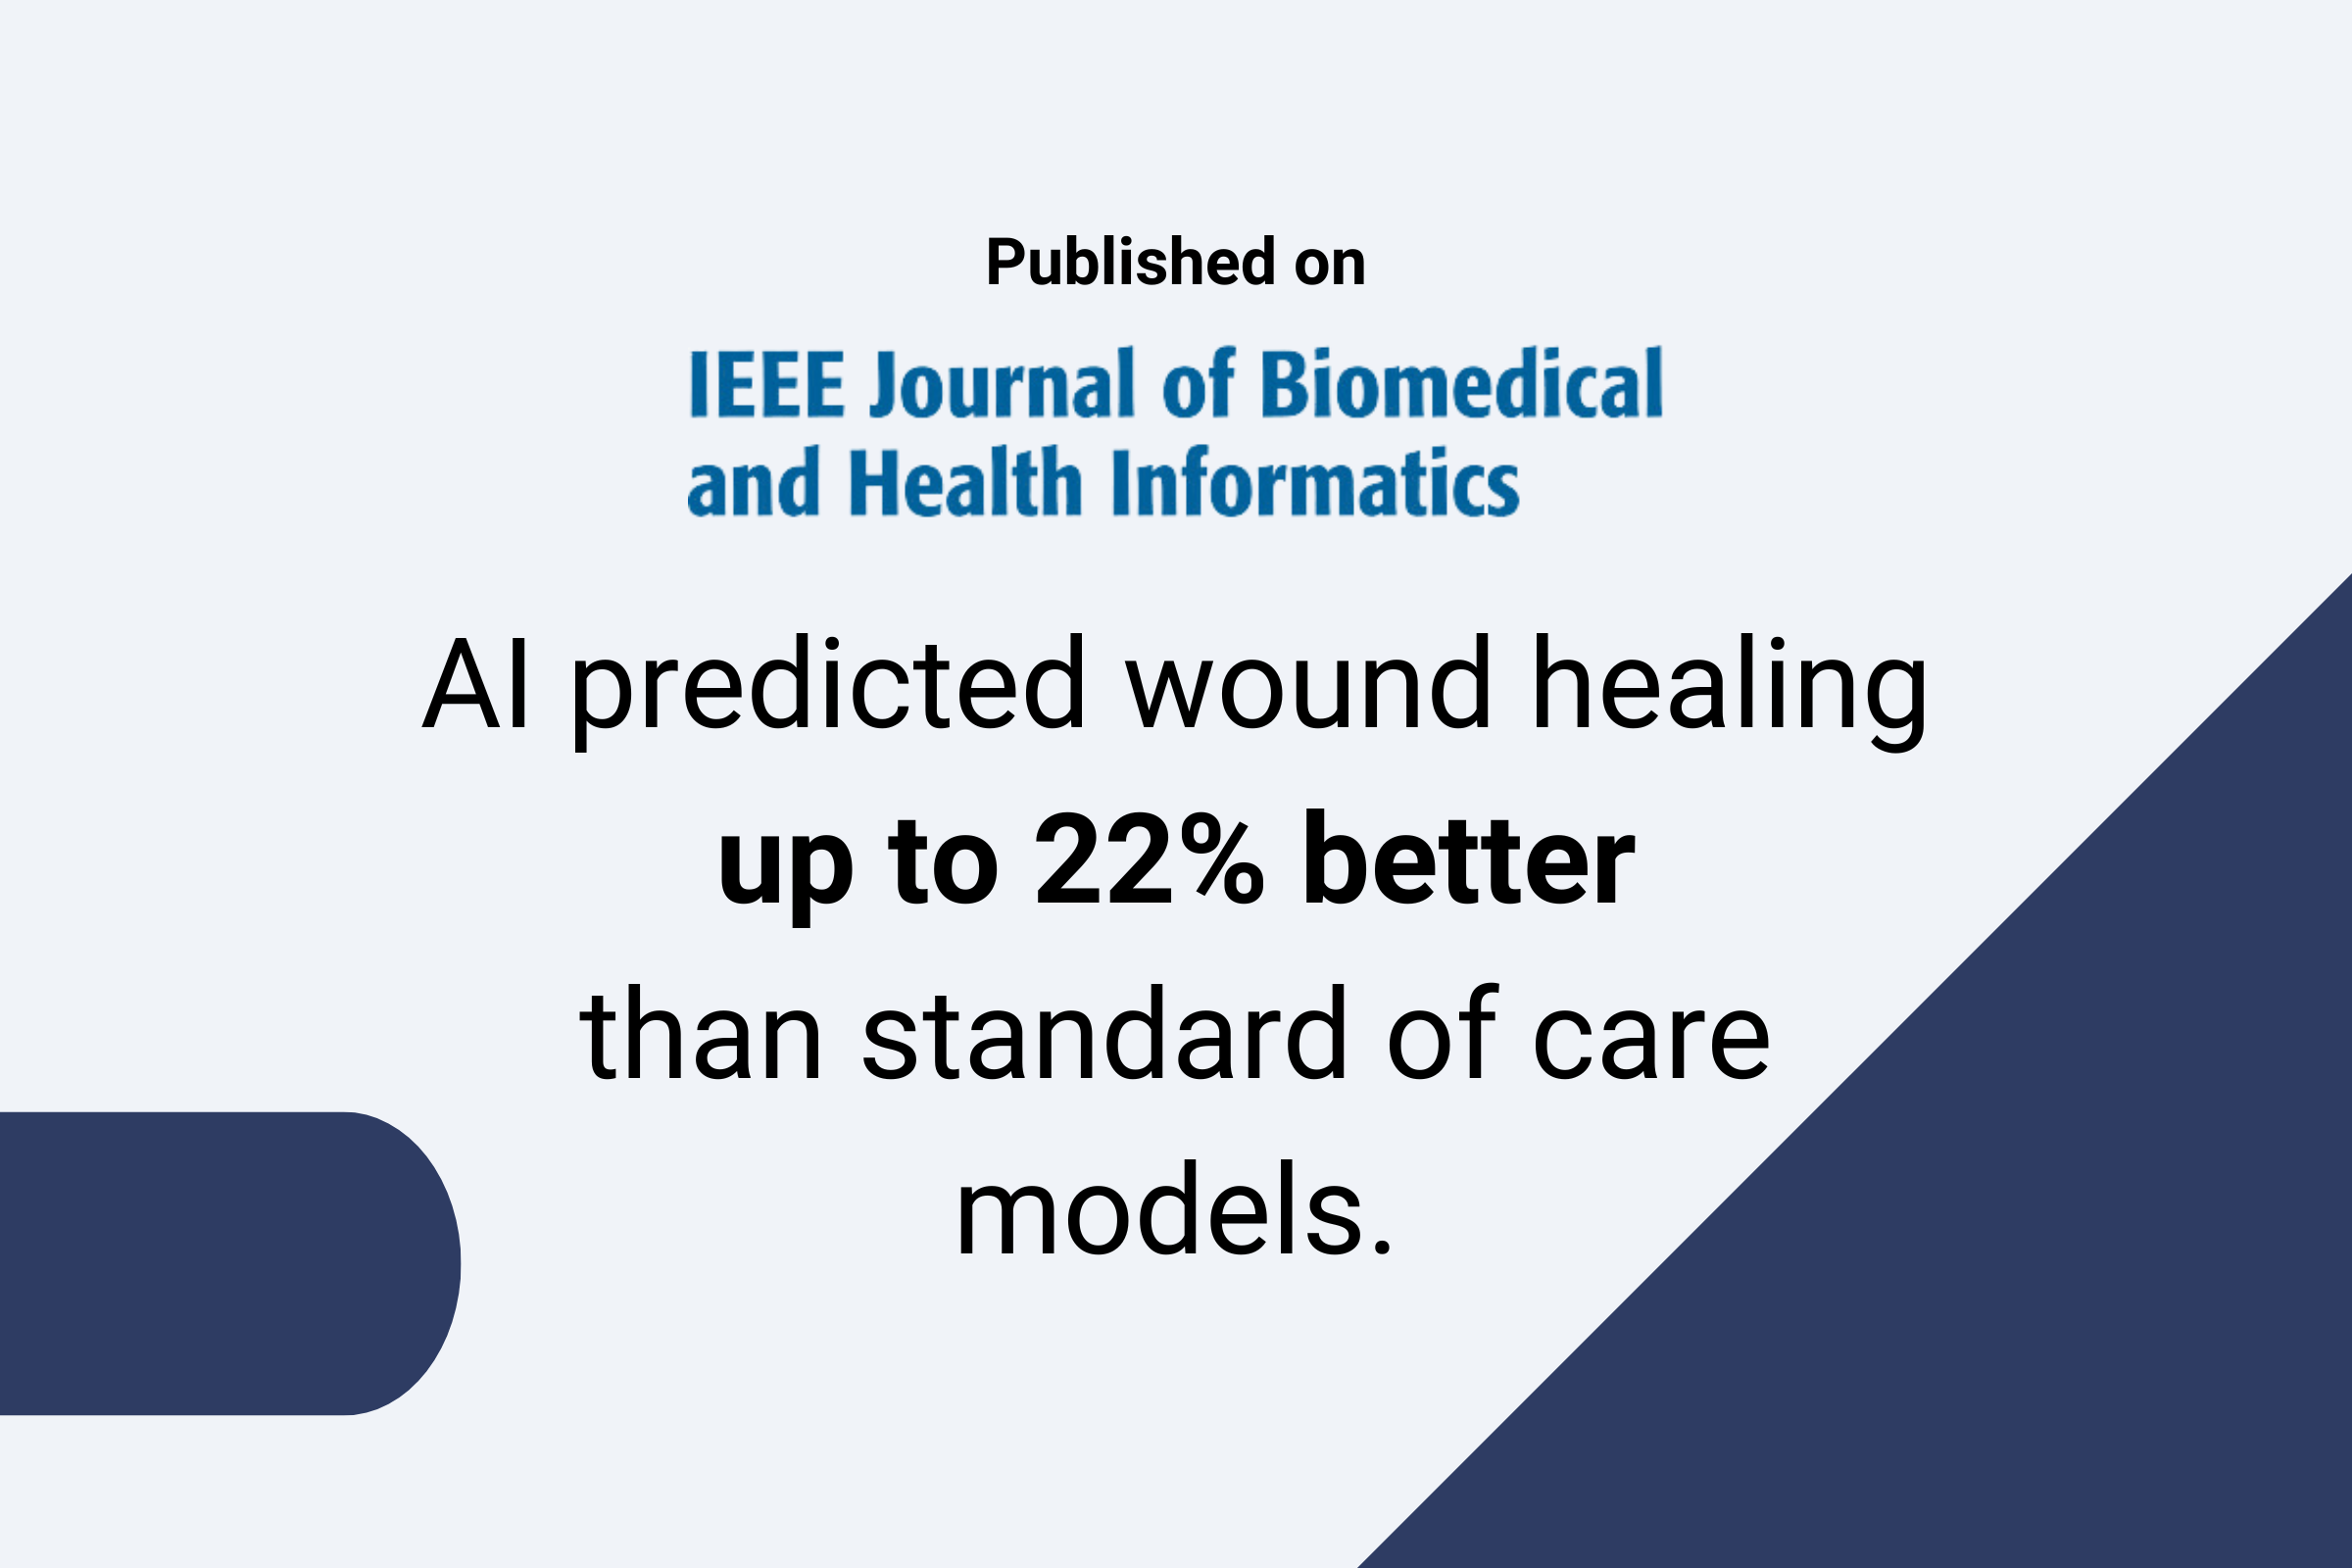 AI predicted wound healing up to 22% better than standard of care models.